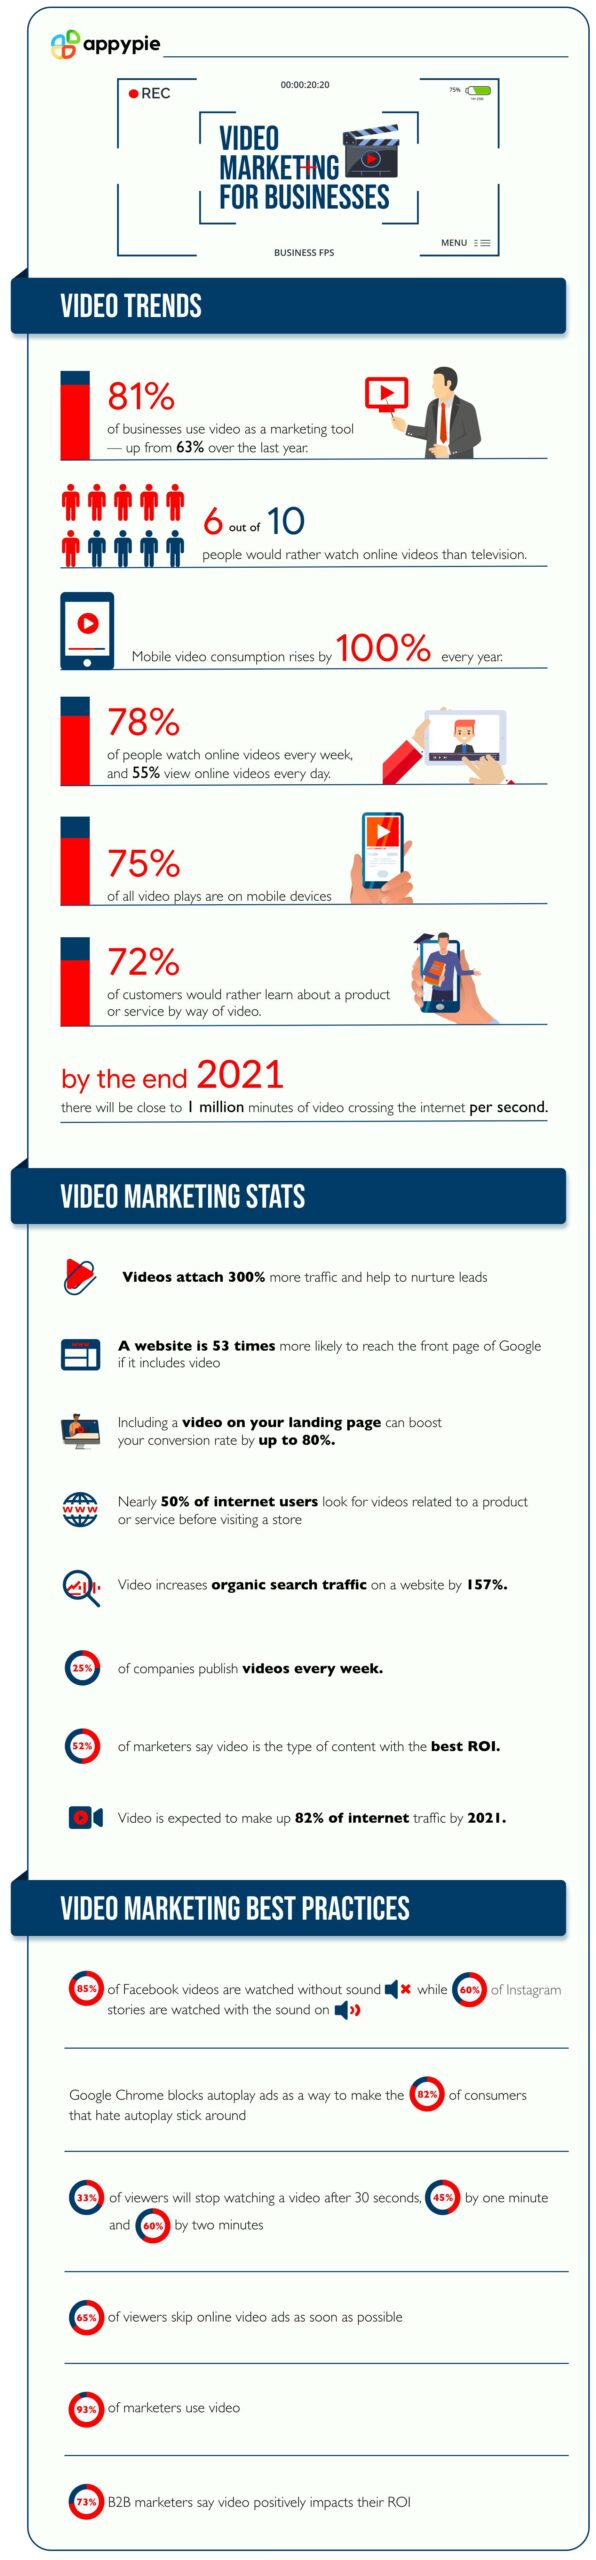 Video Marketing for businesses in 2021 - Appy Pie